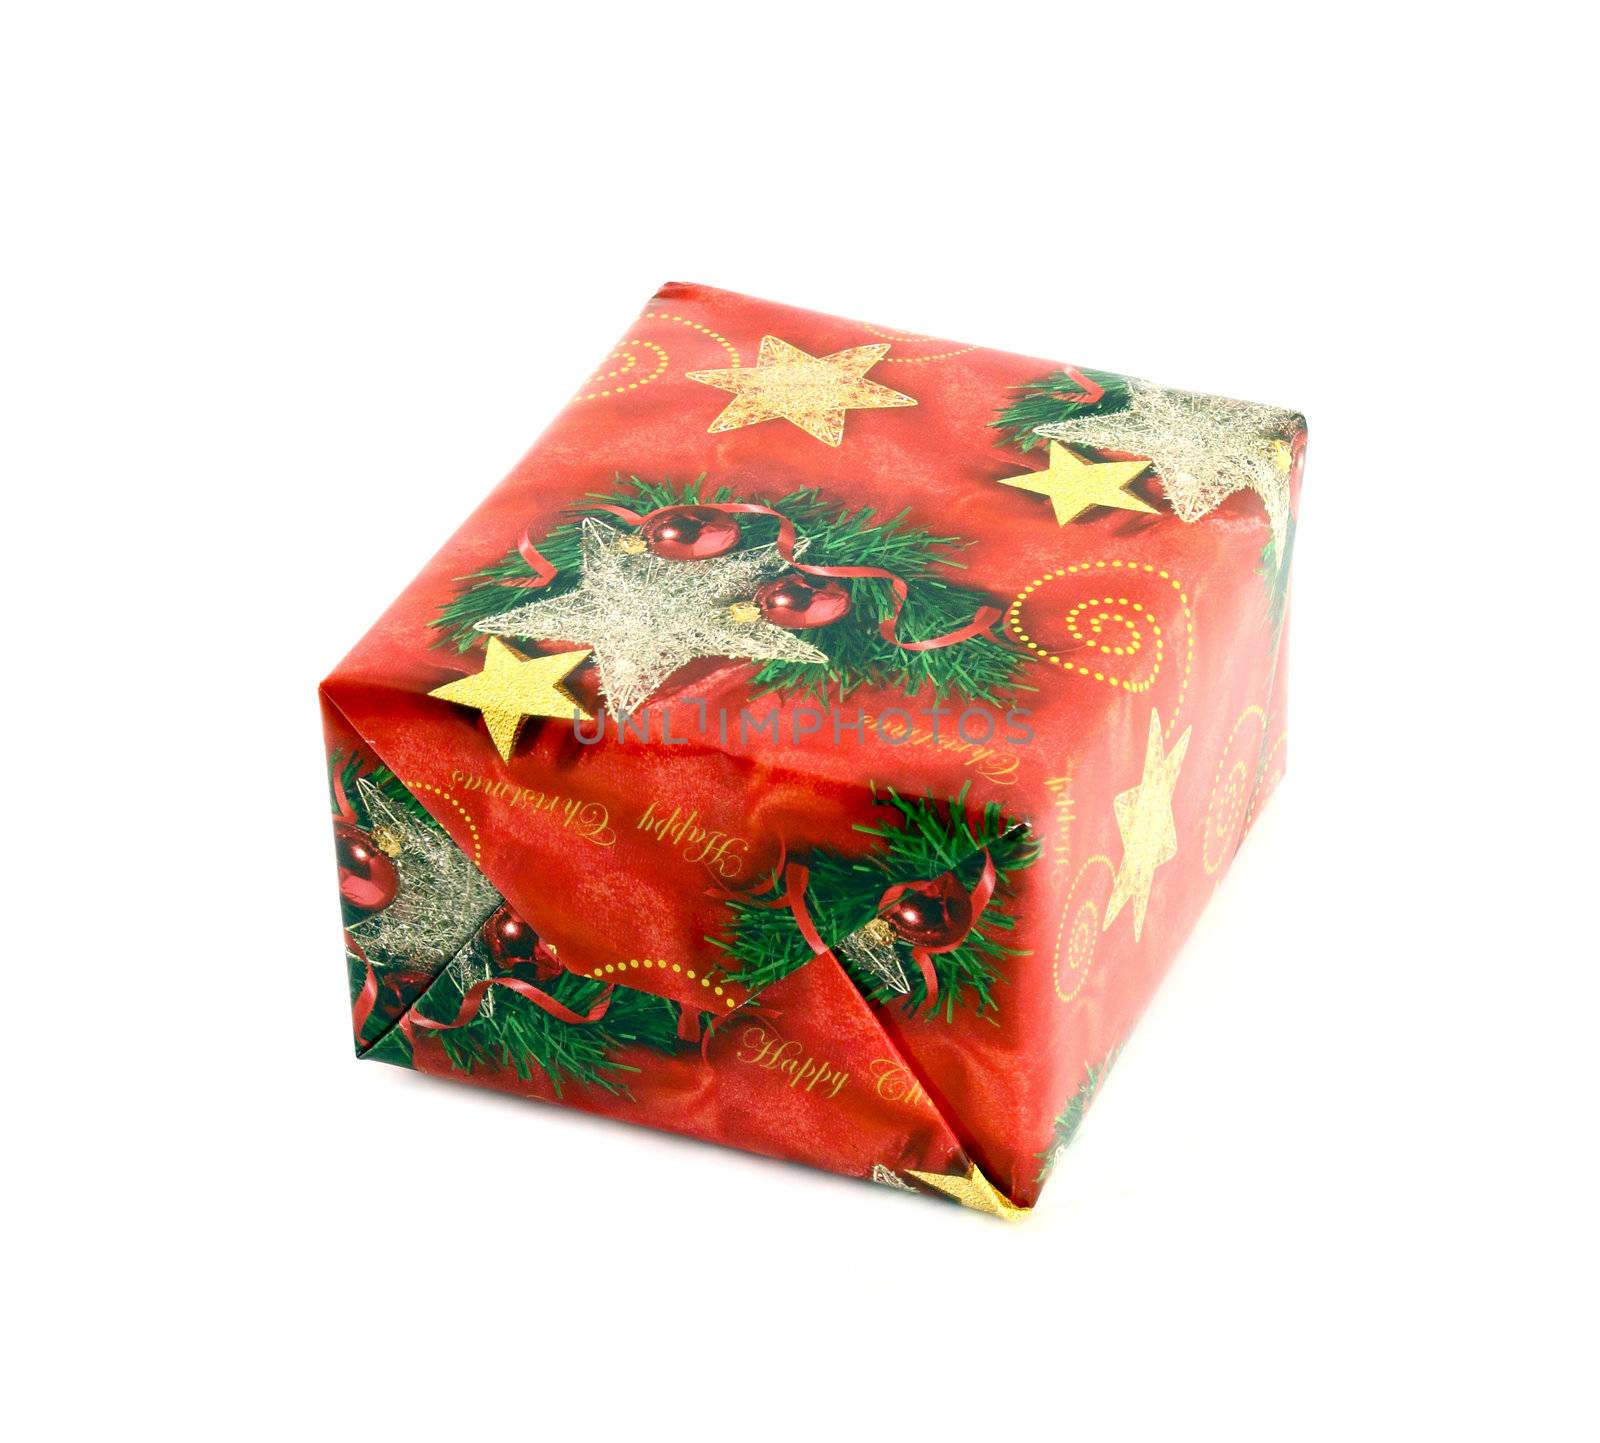 Christmas gift box on white background by geargodz